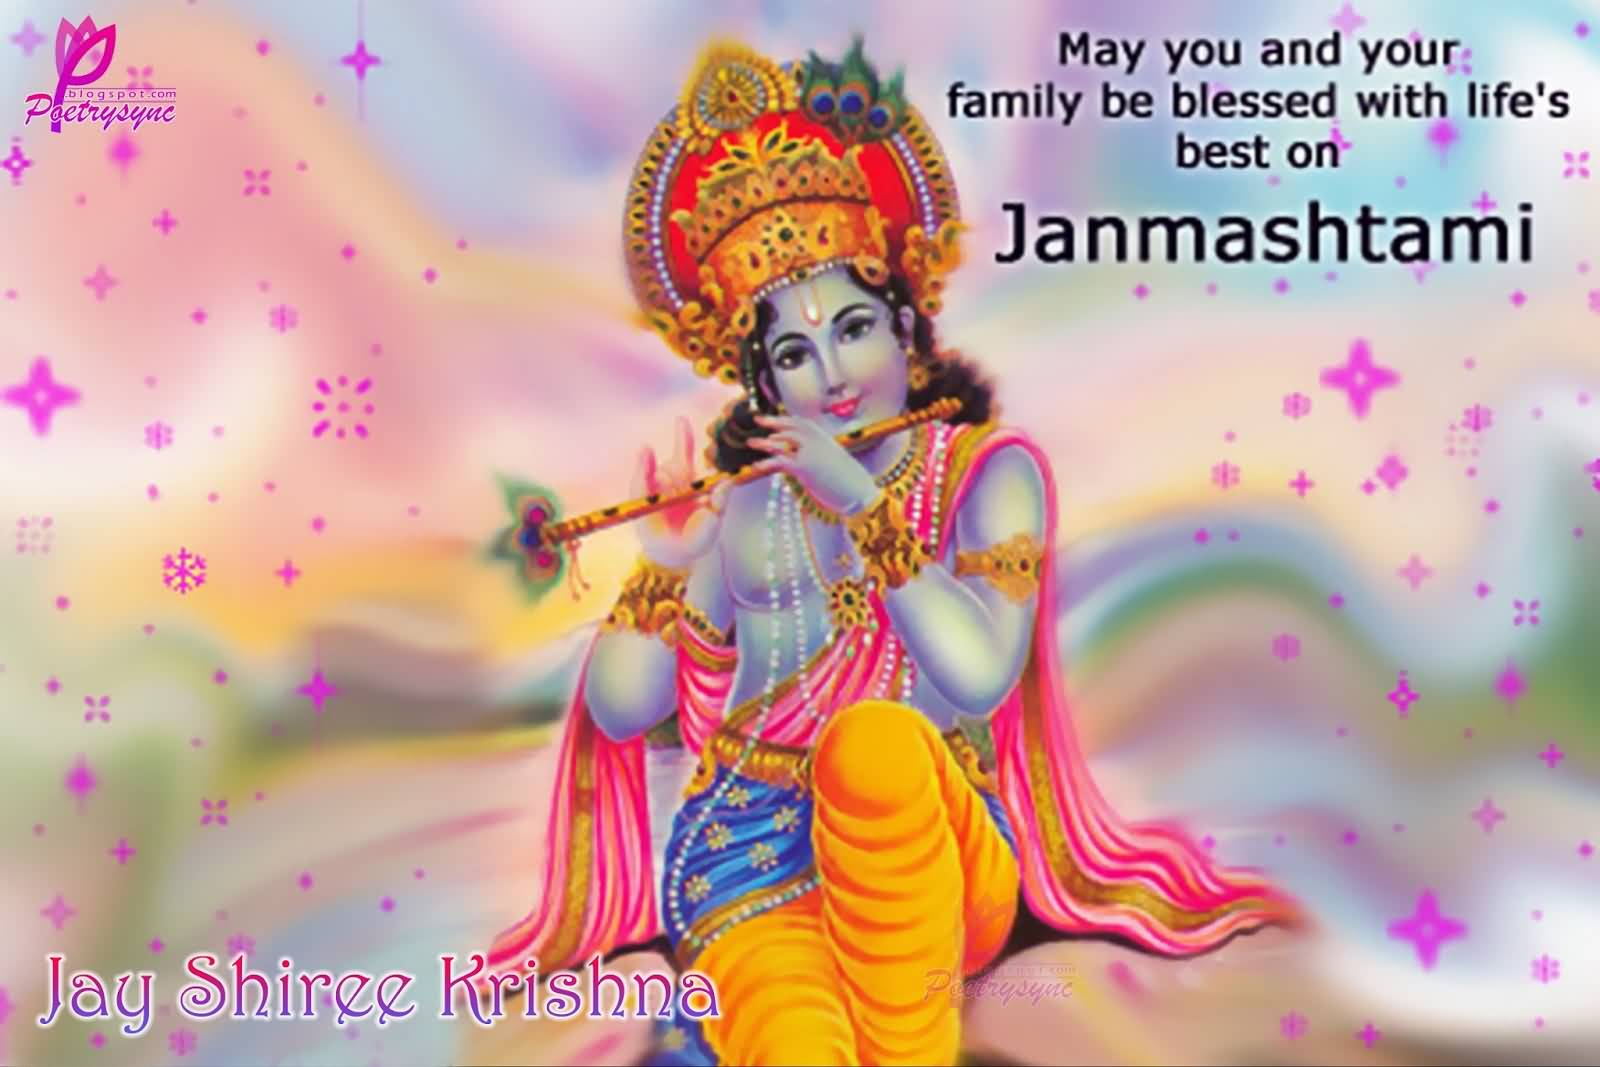 May You And Your Family Be Blessed With Life's Best On Janmashtami